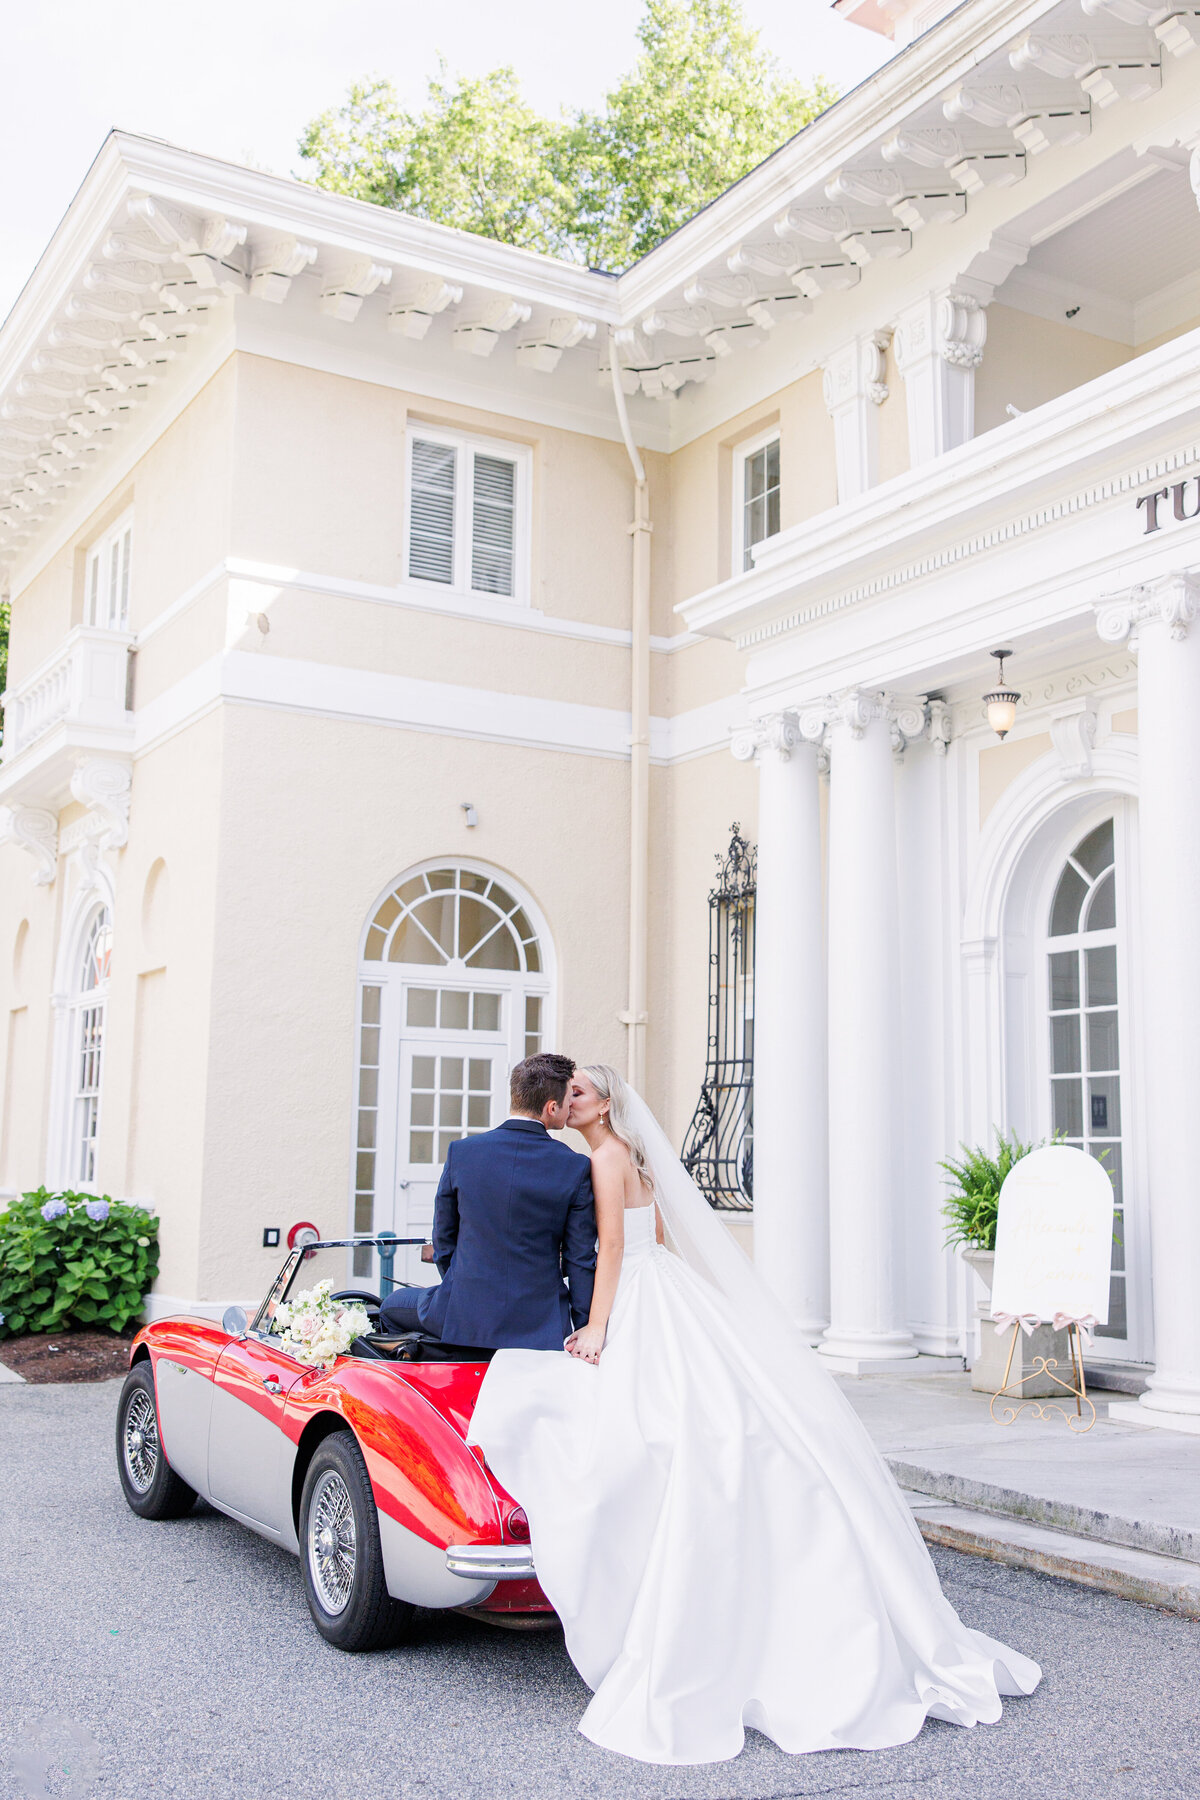 Bride and groom kissing while sitting on a vintage car during their Tupper Manor wedding pictures